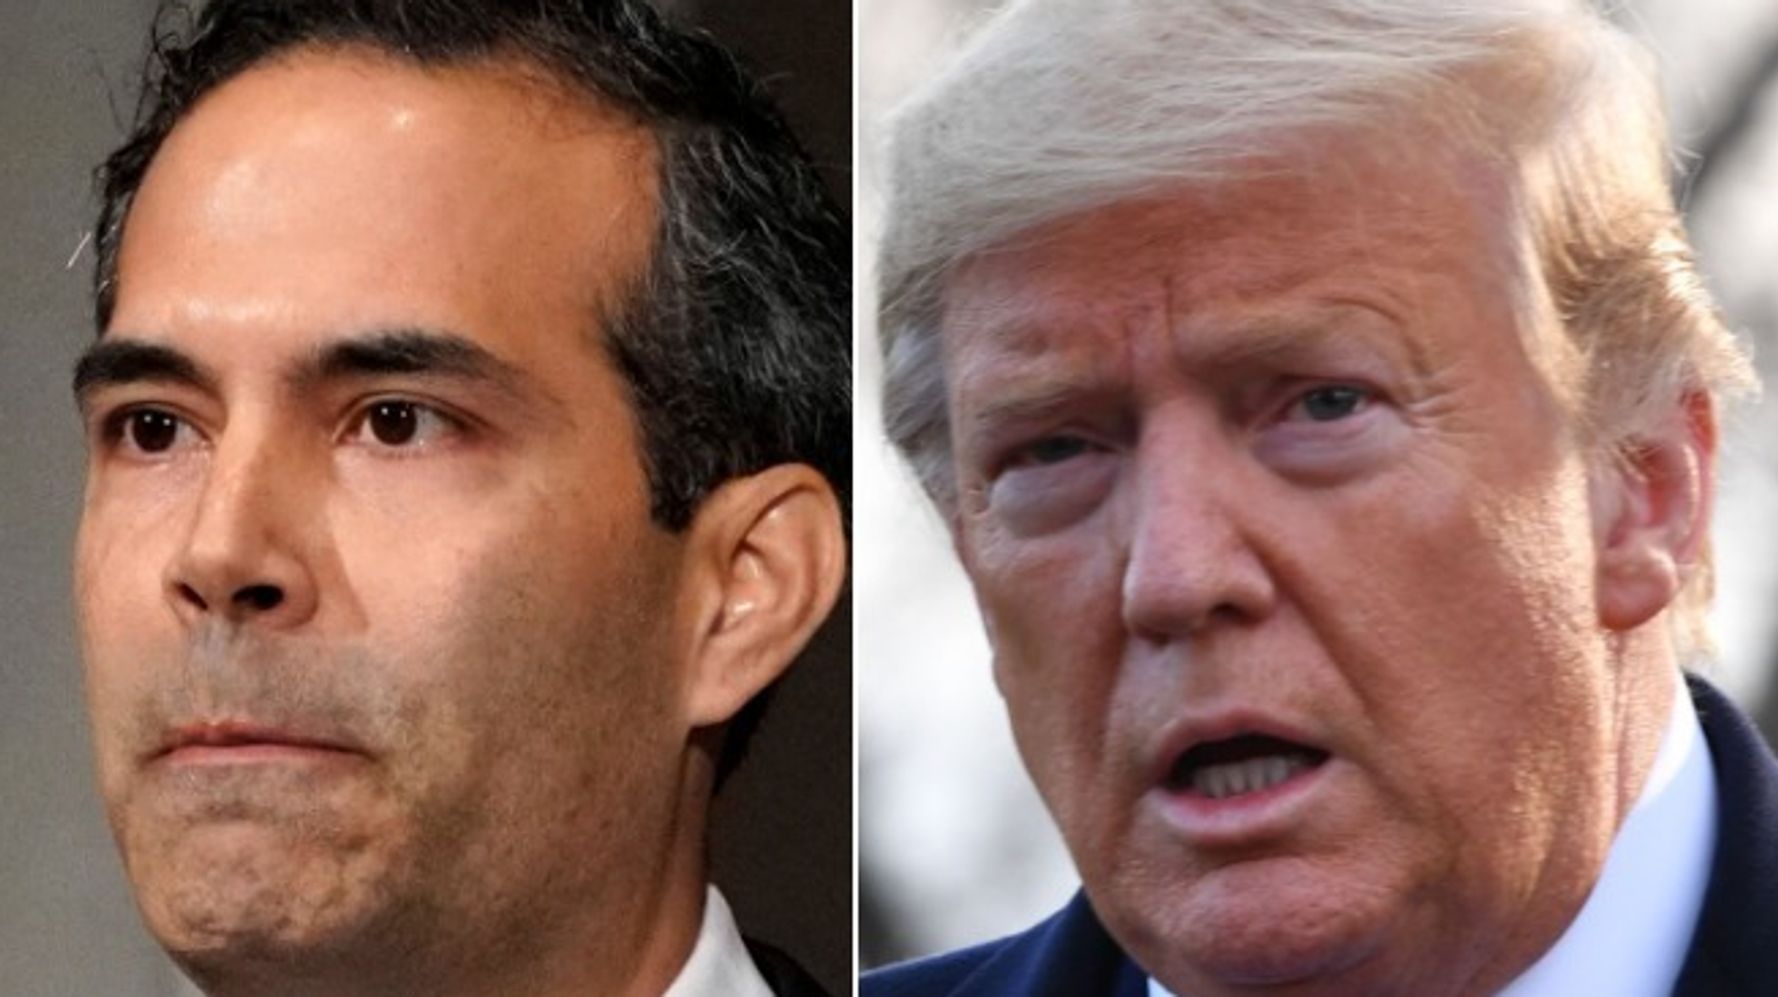 ‘Kneel Before Trump’: George P. Bush Mocked For 'Selling Out His Own Family'